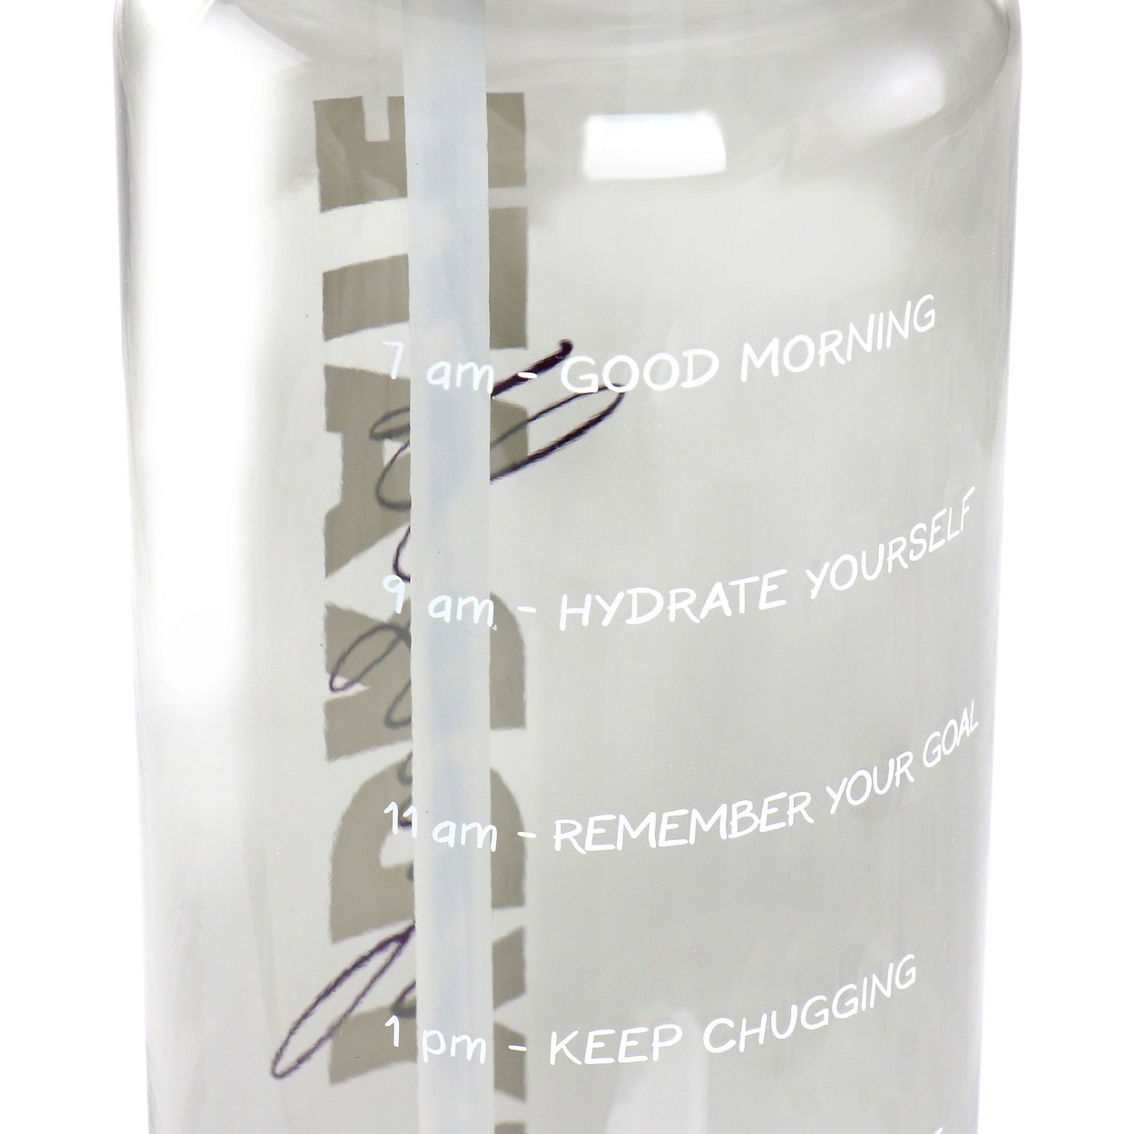 Gibson Home Brever 50oz Hydrate Yourself Hourly Motivation Water Bottle in Grey - Image 4 of 5